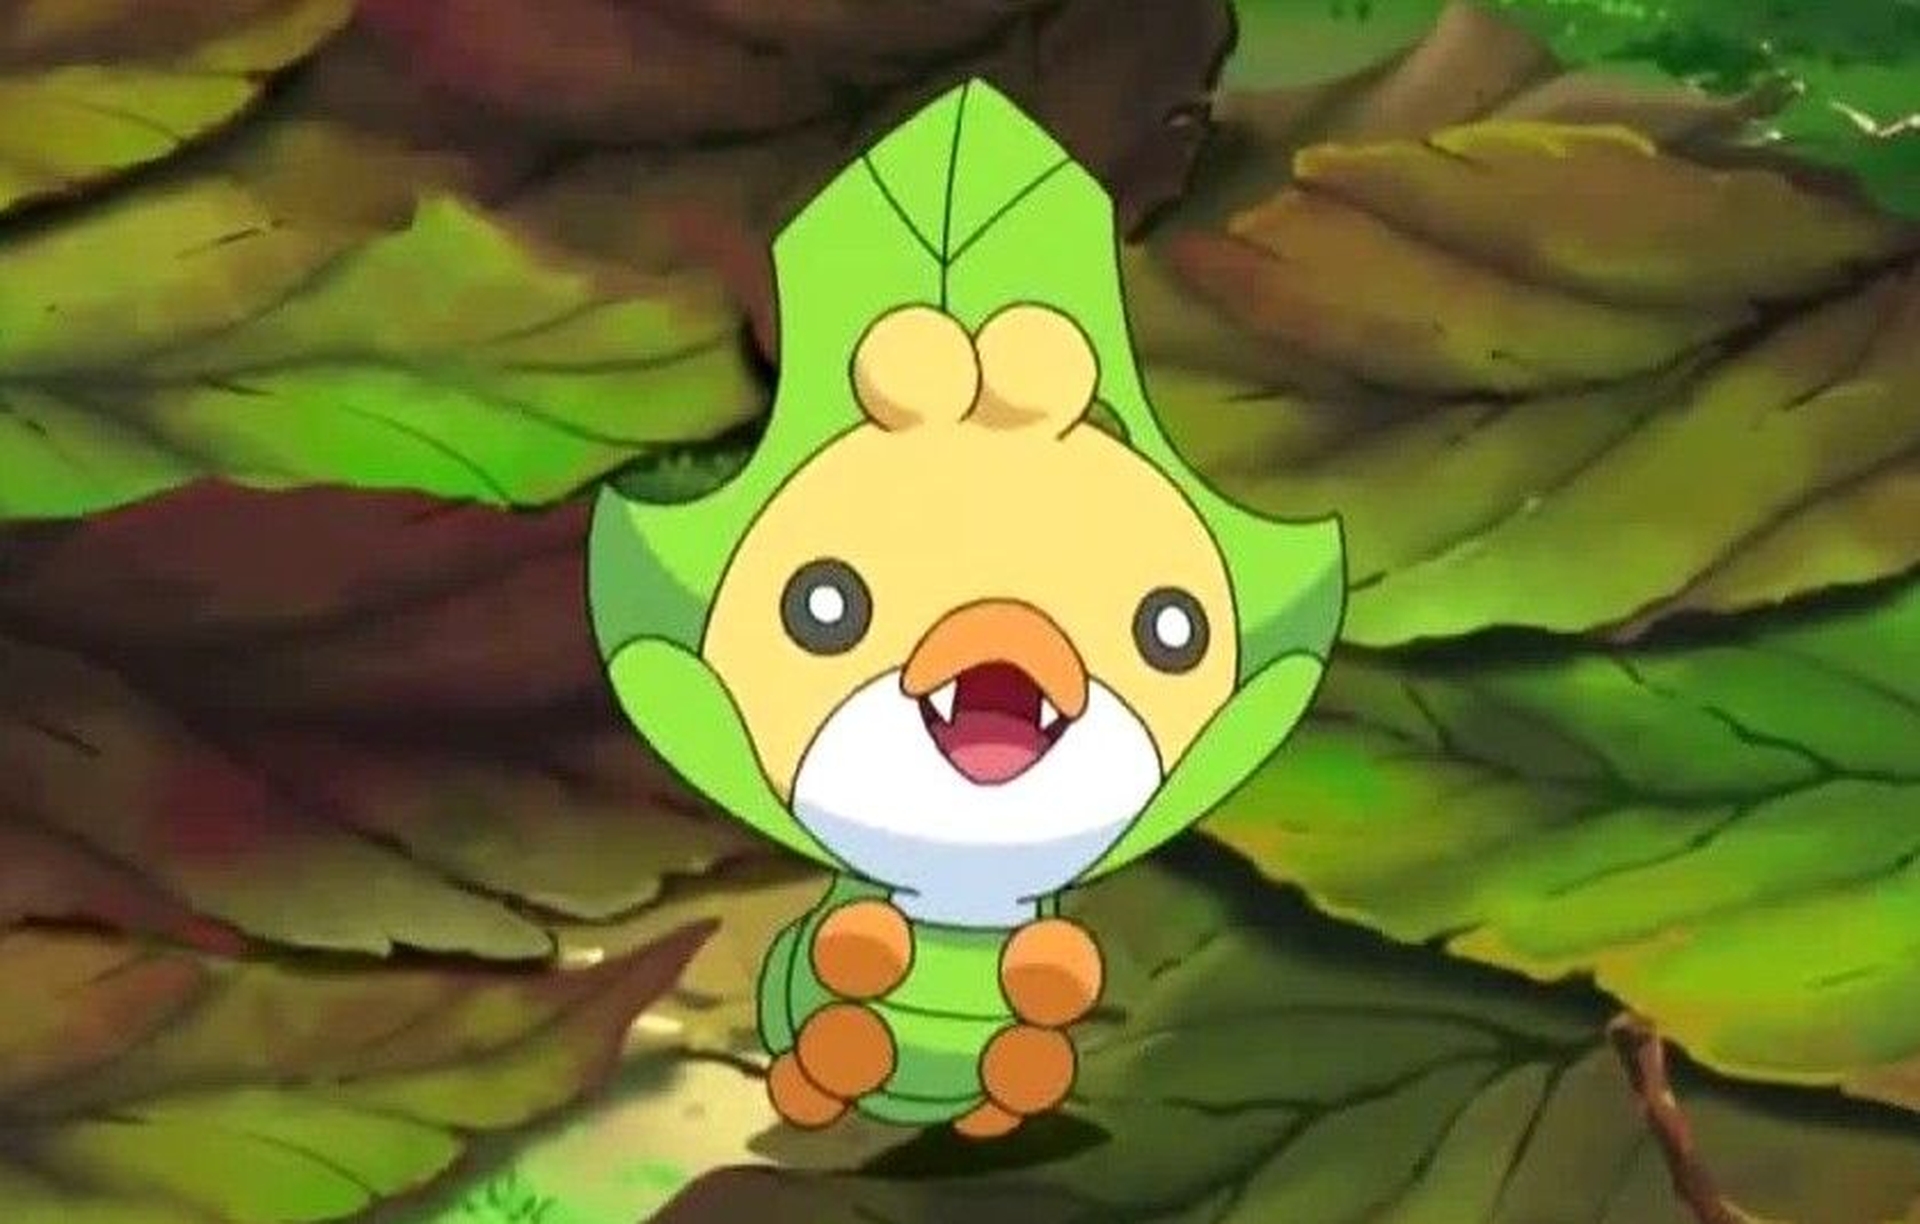 Pokemon GO offers up many Pokemons for trainers to grab and evolve, so today we're telling you all there is to know about Sewaddle evolution and more.